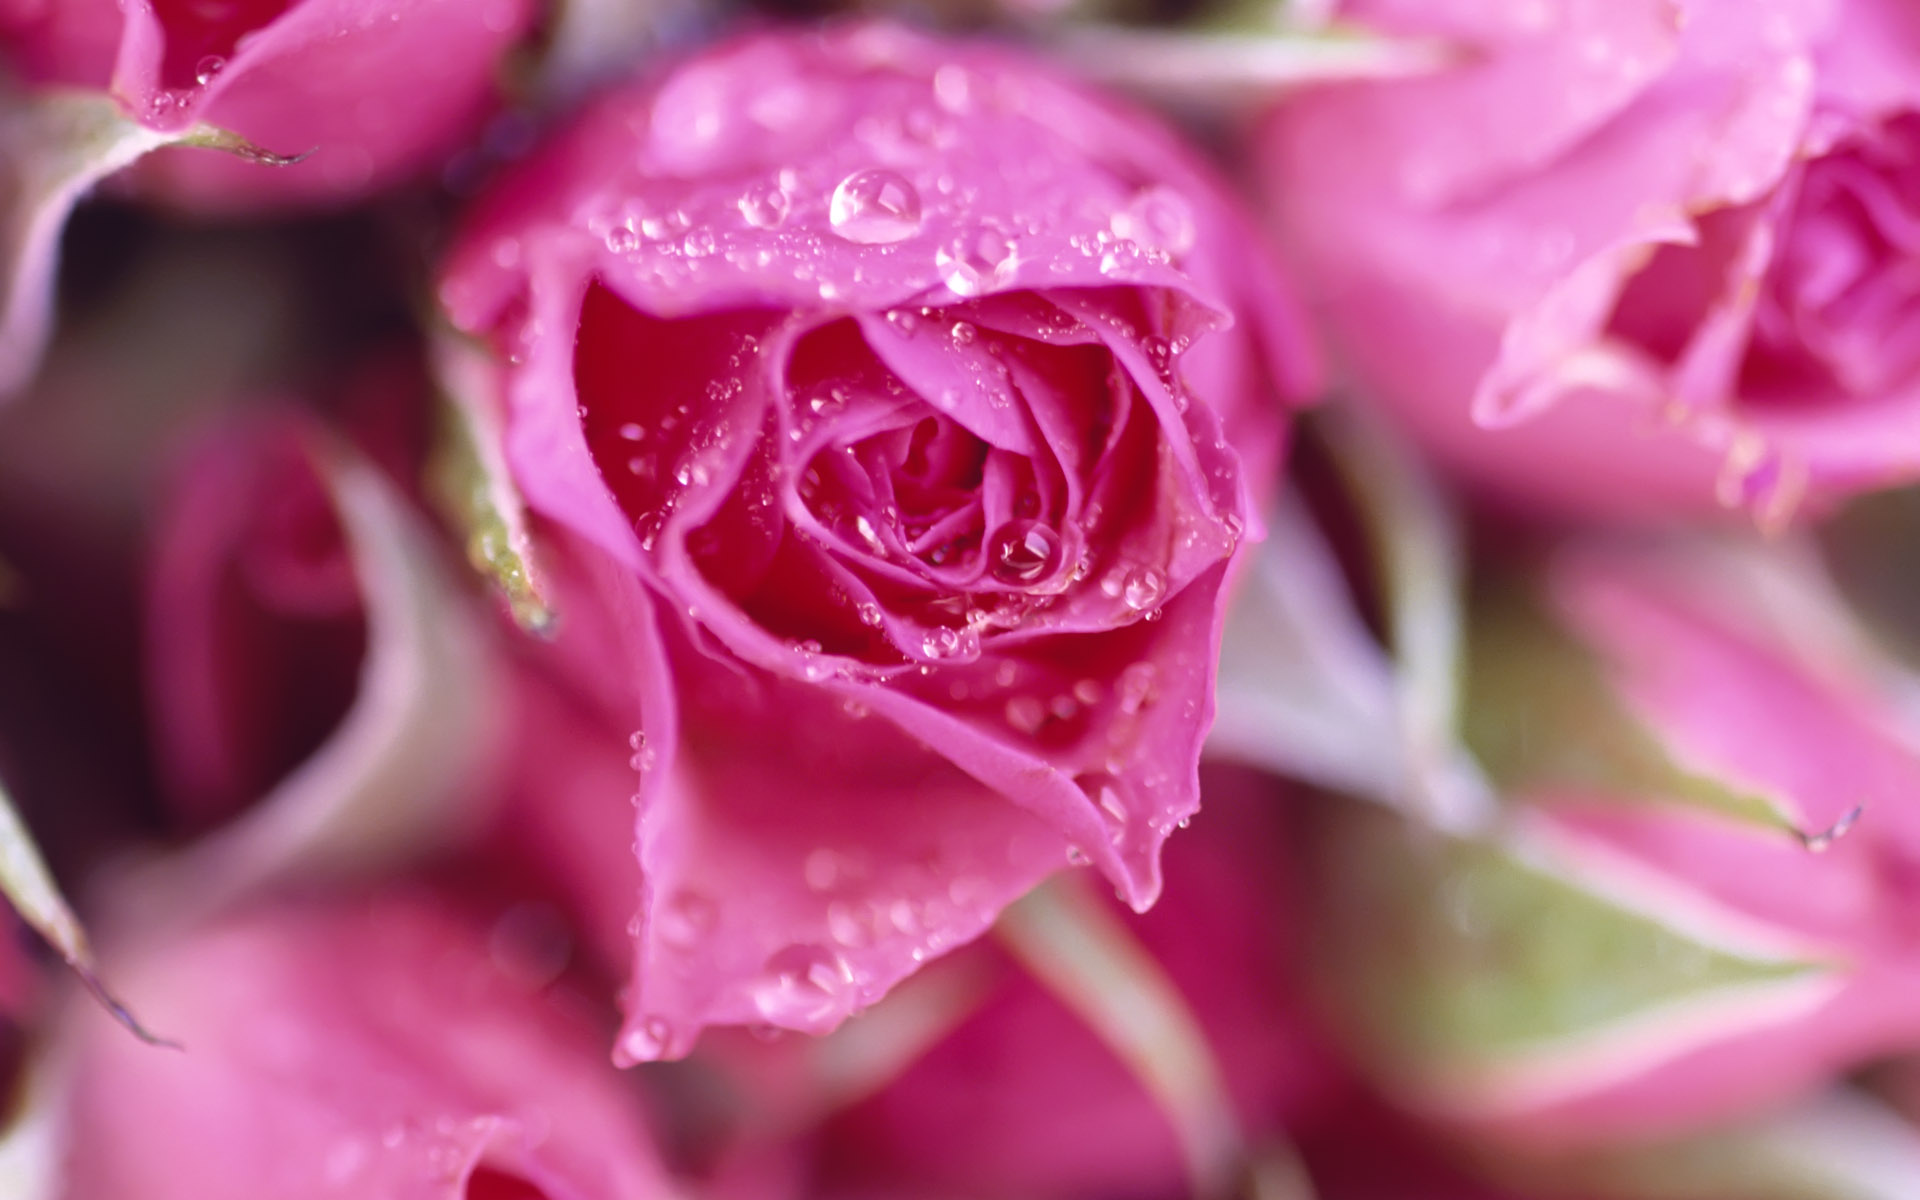 High-resolution Texture Plant Flowers - Rose Attractive Pink Rose - HD Wallpaper 